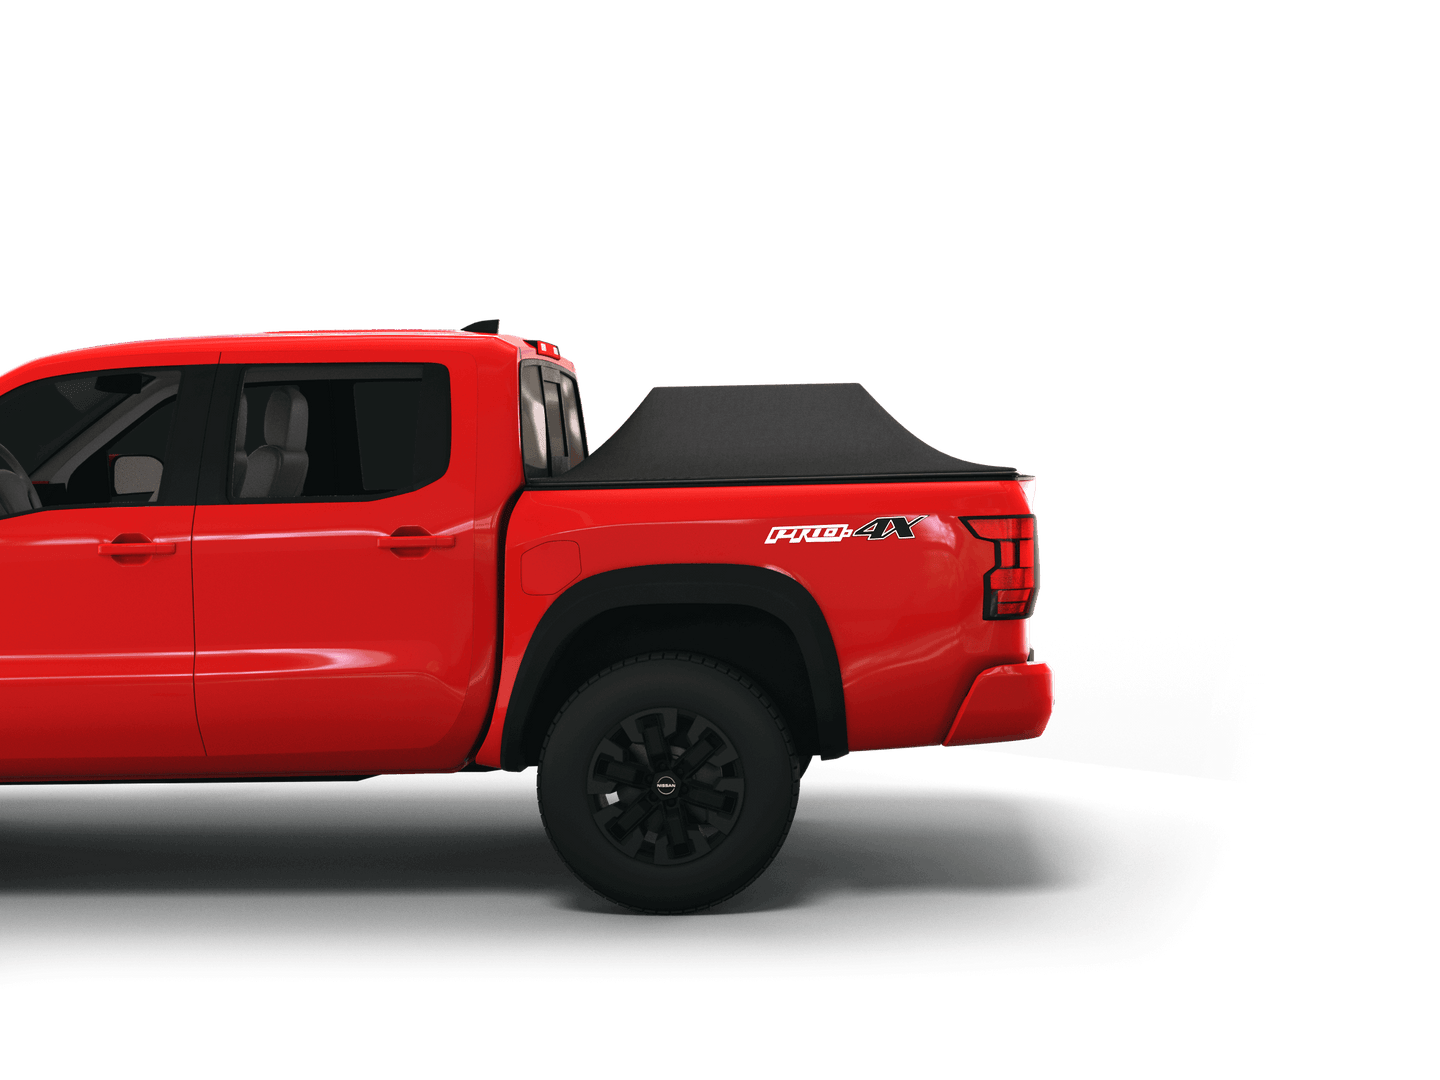 Red Nissan Frontier with Sawtooth Stretch tonneau cover expanded over cargo load